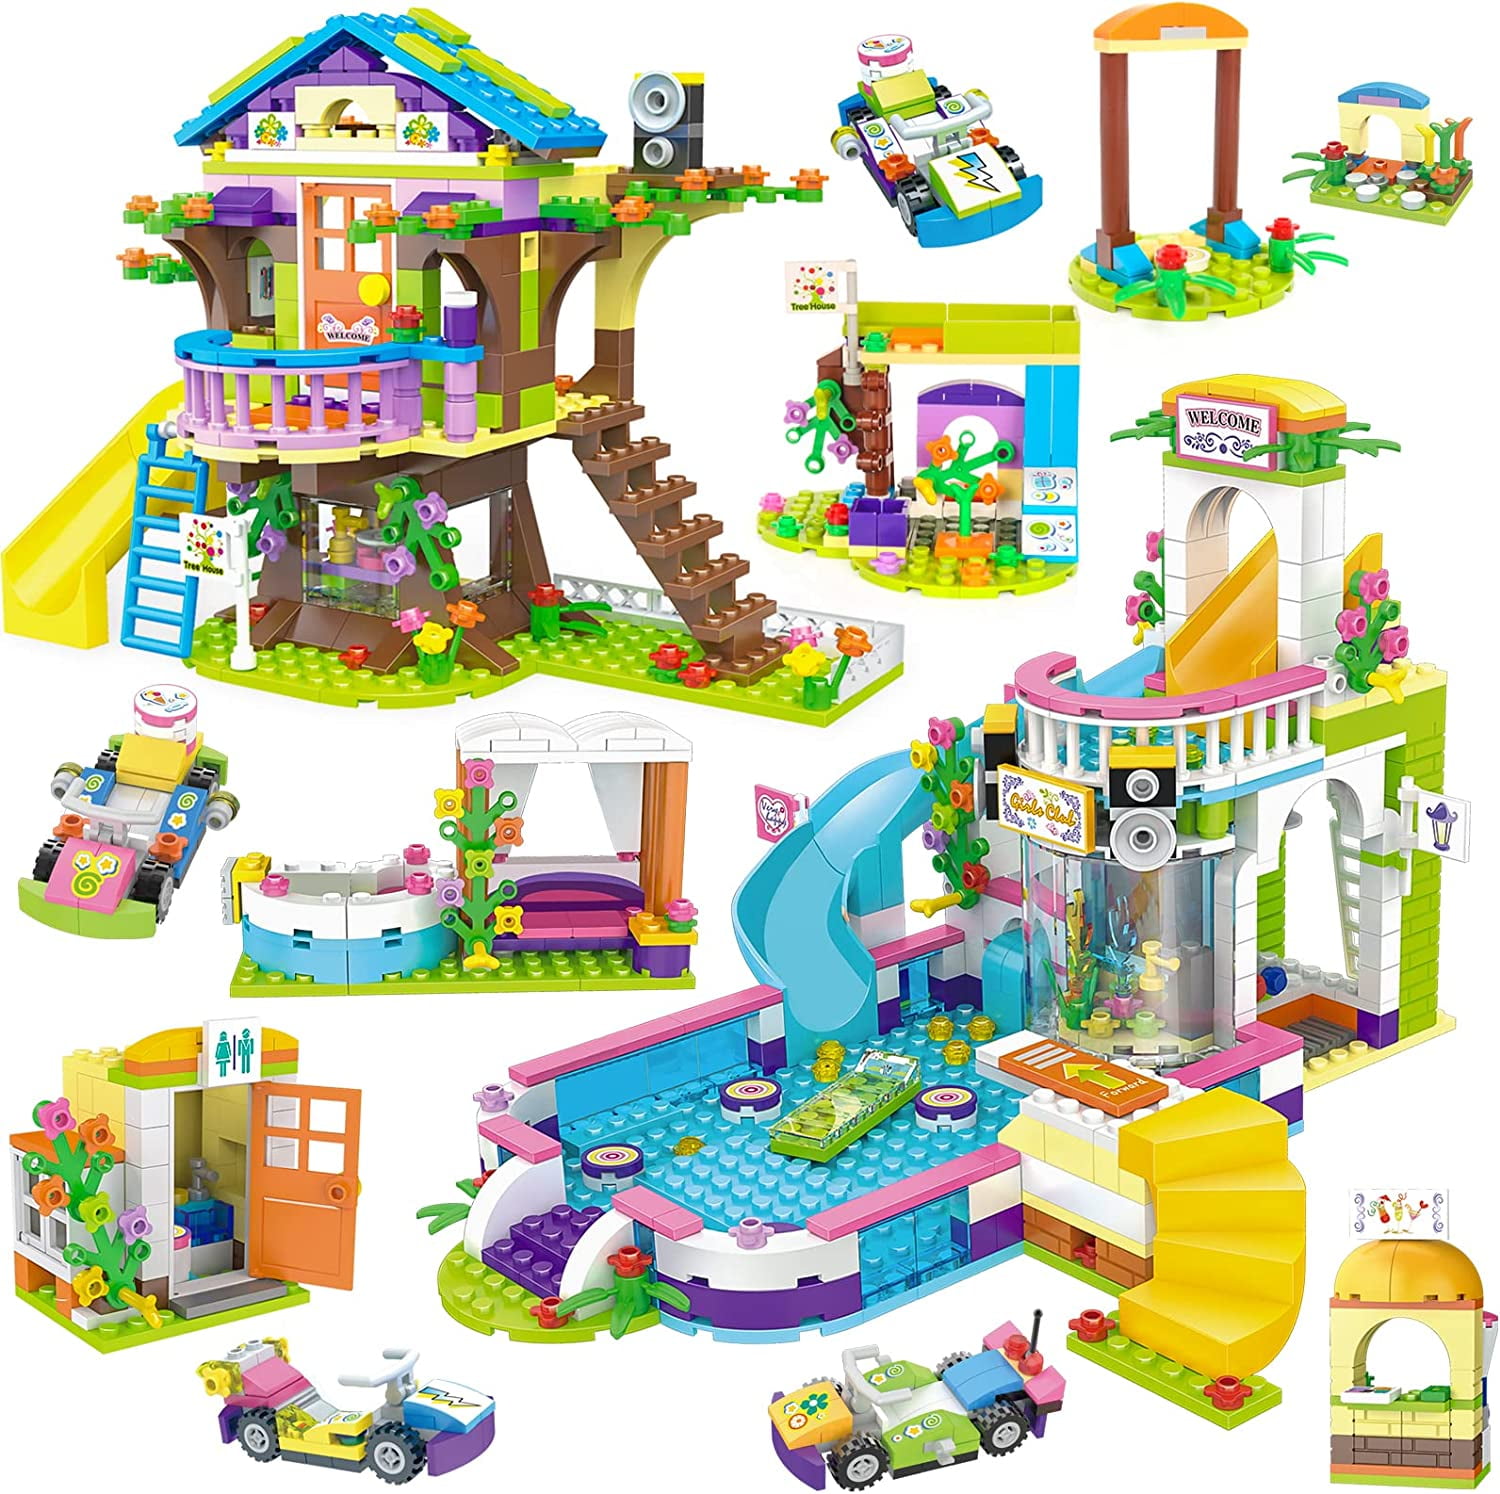 Friends Tree House Building Kit, Girls Summer Pool Party Blocks for Kids Aged 6-12 (1274 Pieces) - Walmart.com